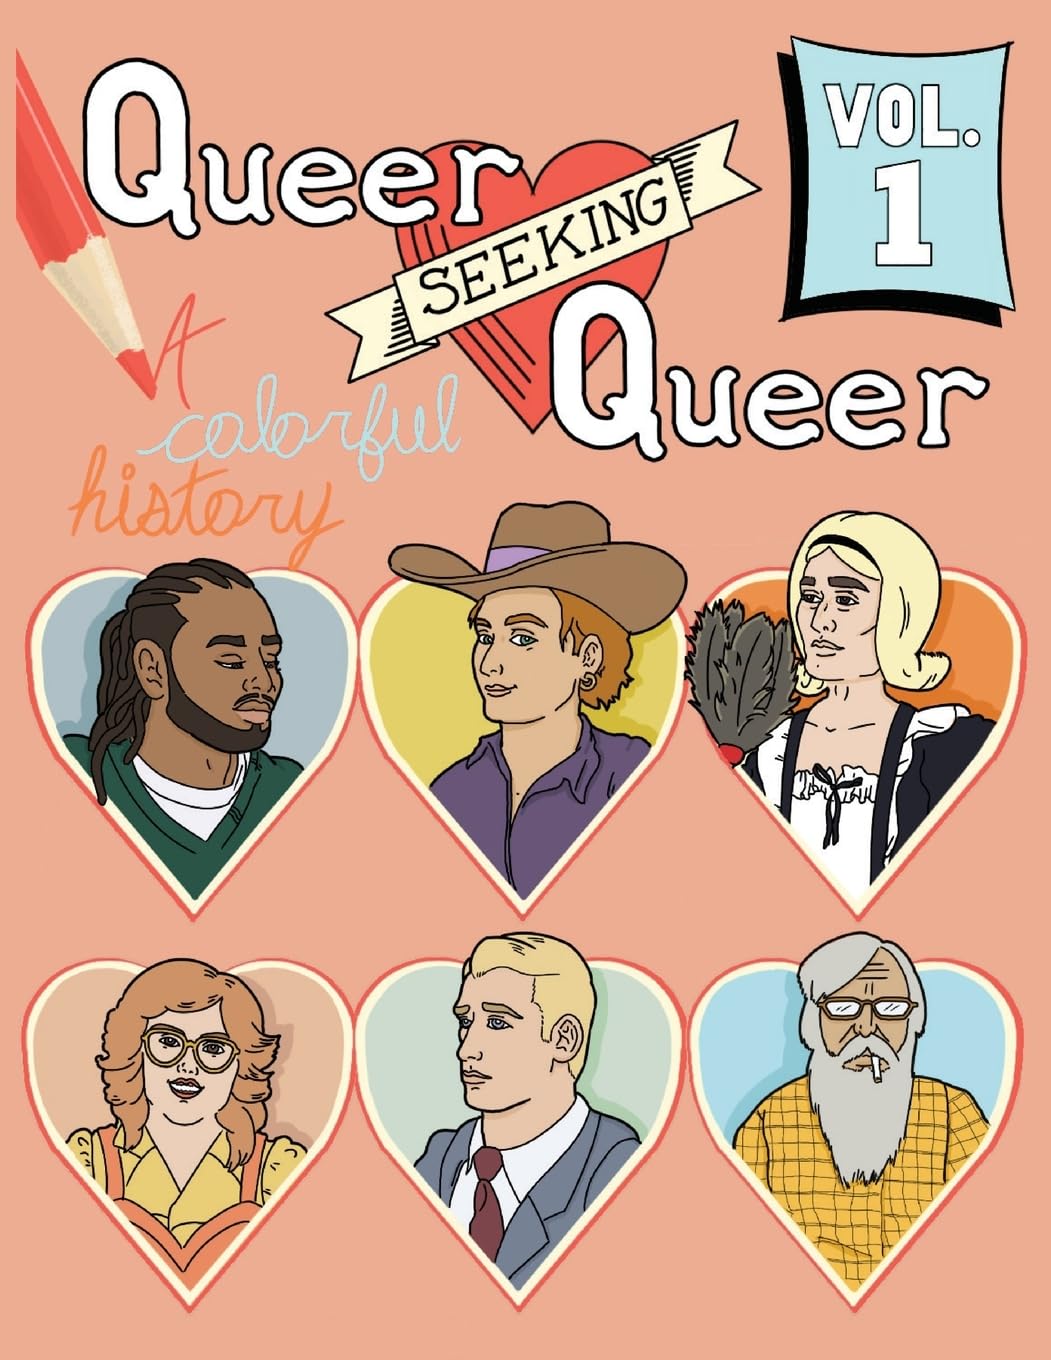 Queer Seeking Queer: A Colorful History